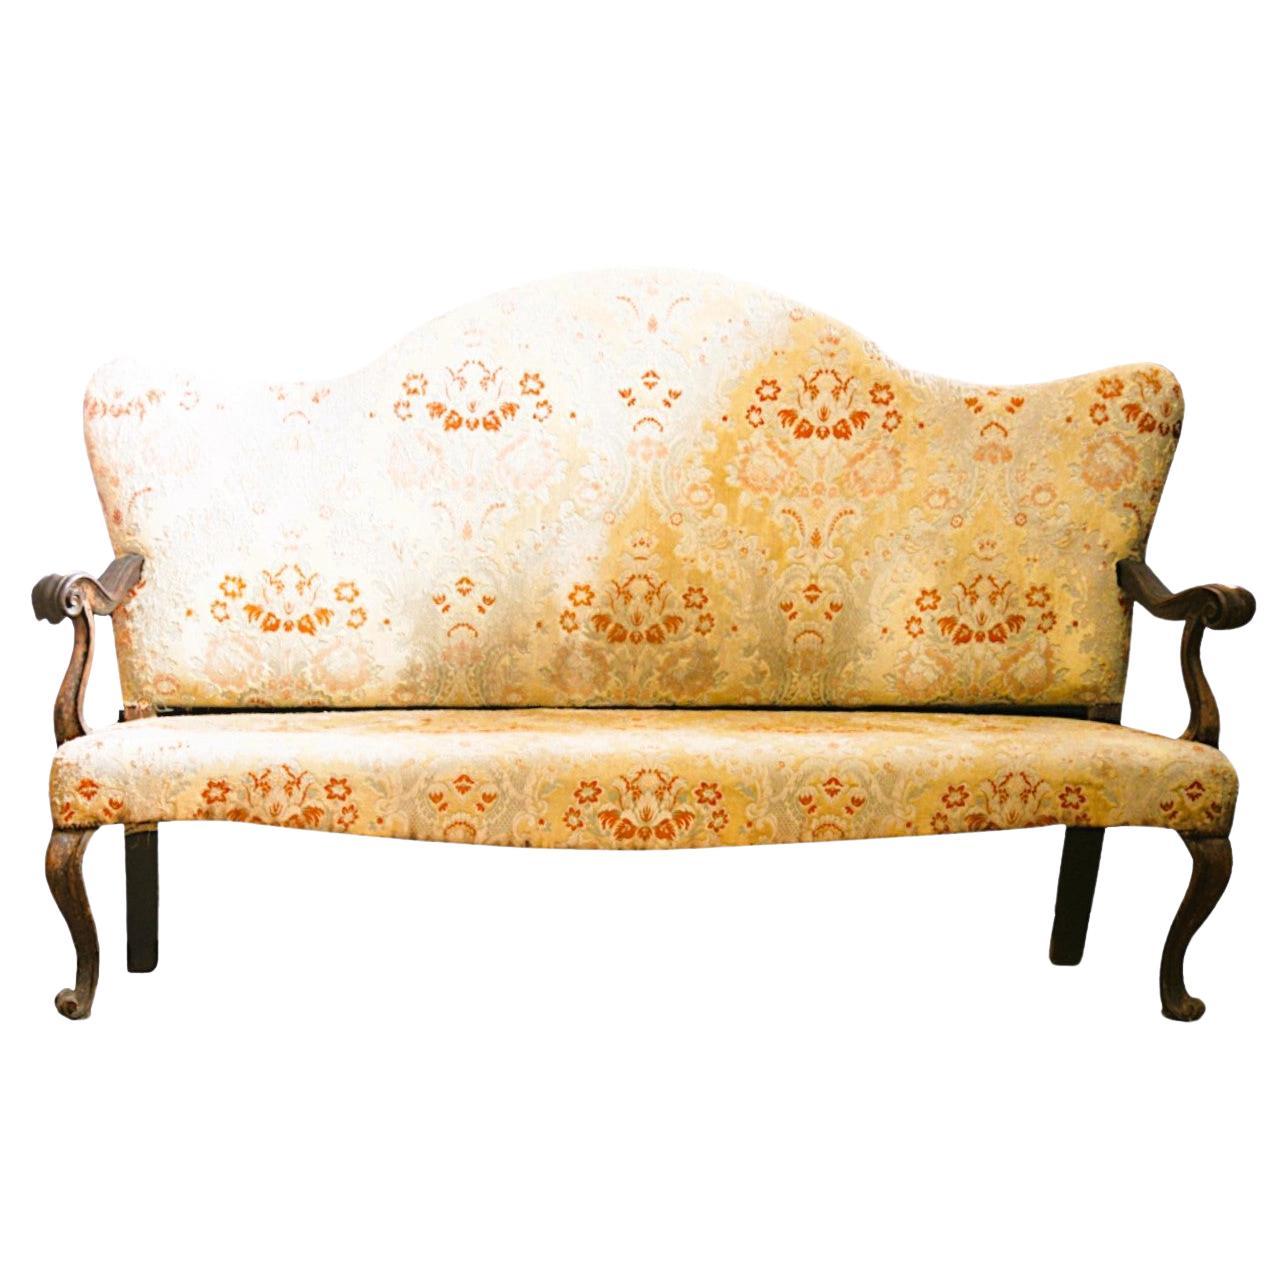 18th century Louis XV sofa in walnut and first patina